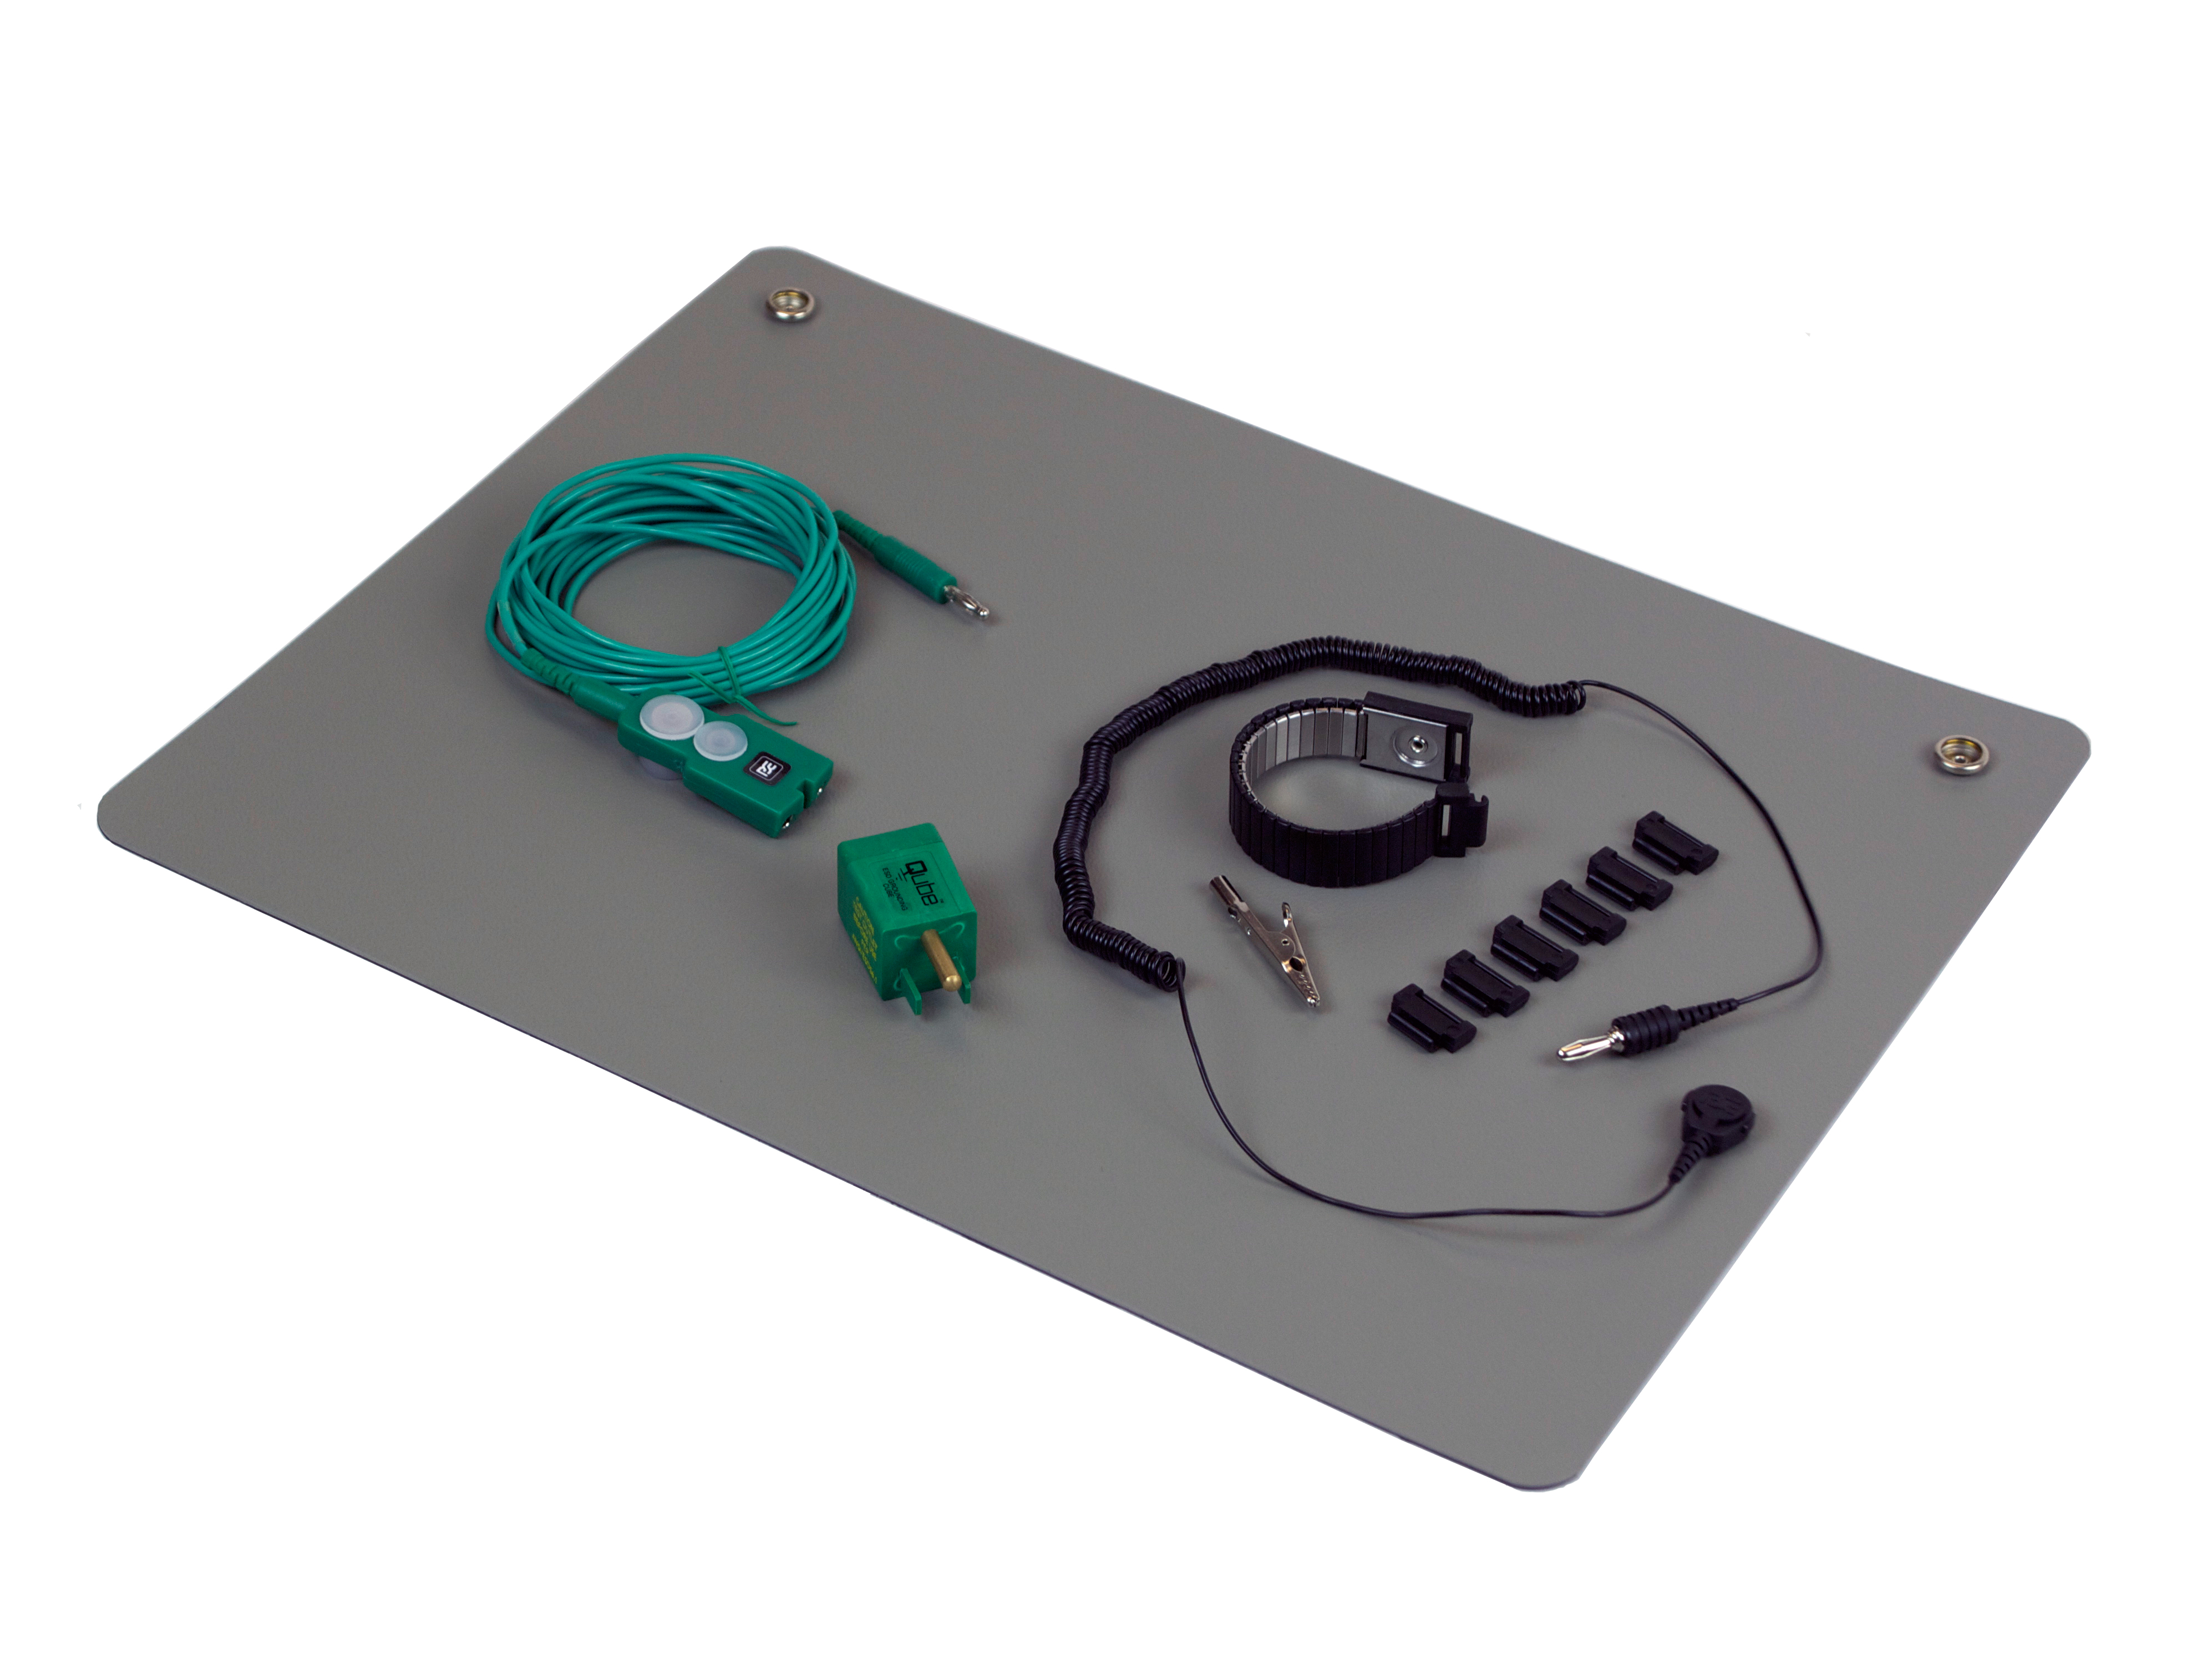 Details about   ESD Safe Table Mat 24"x72"x0.080" Wrist Strap Ground Cord & Universal Snap Kit 